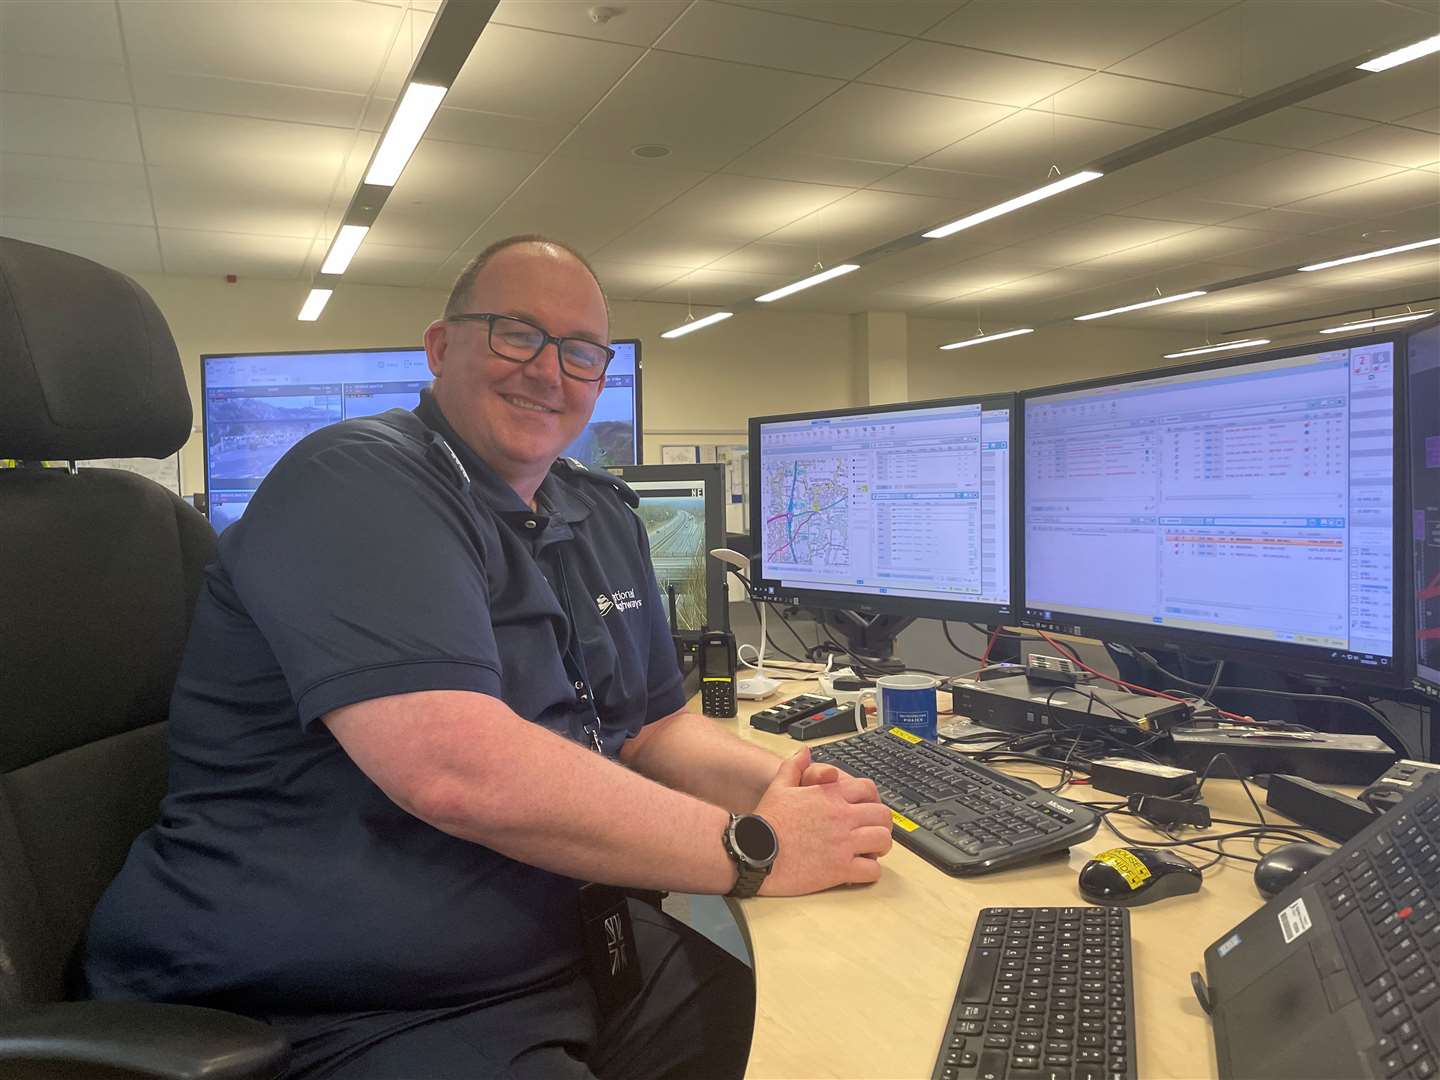 Team manager Andy French based at the South East Regional Control Centre